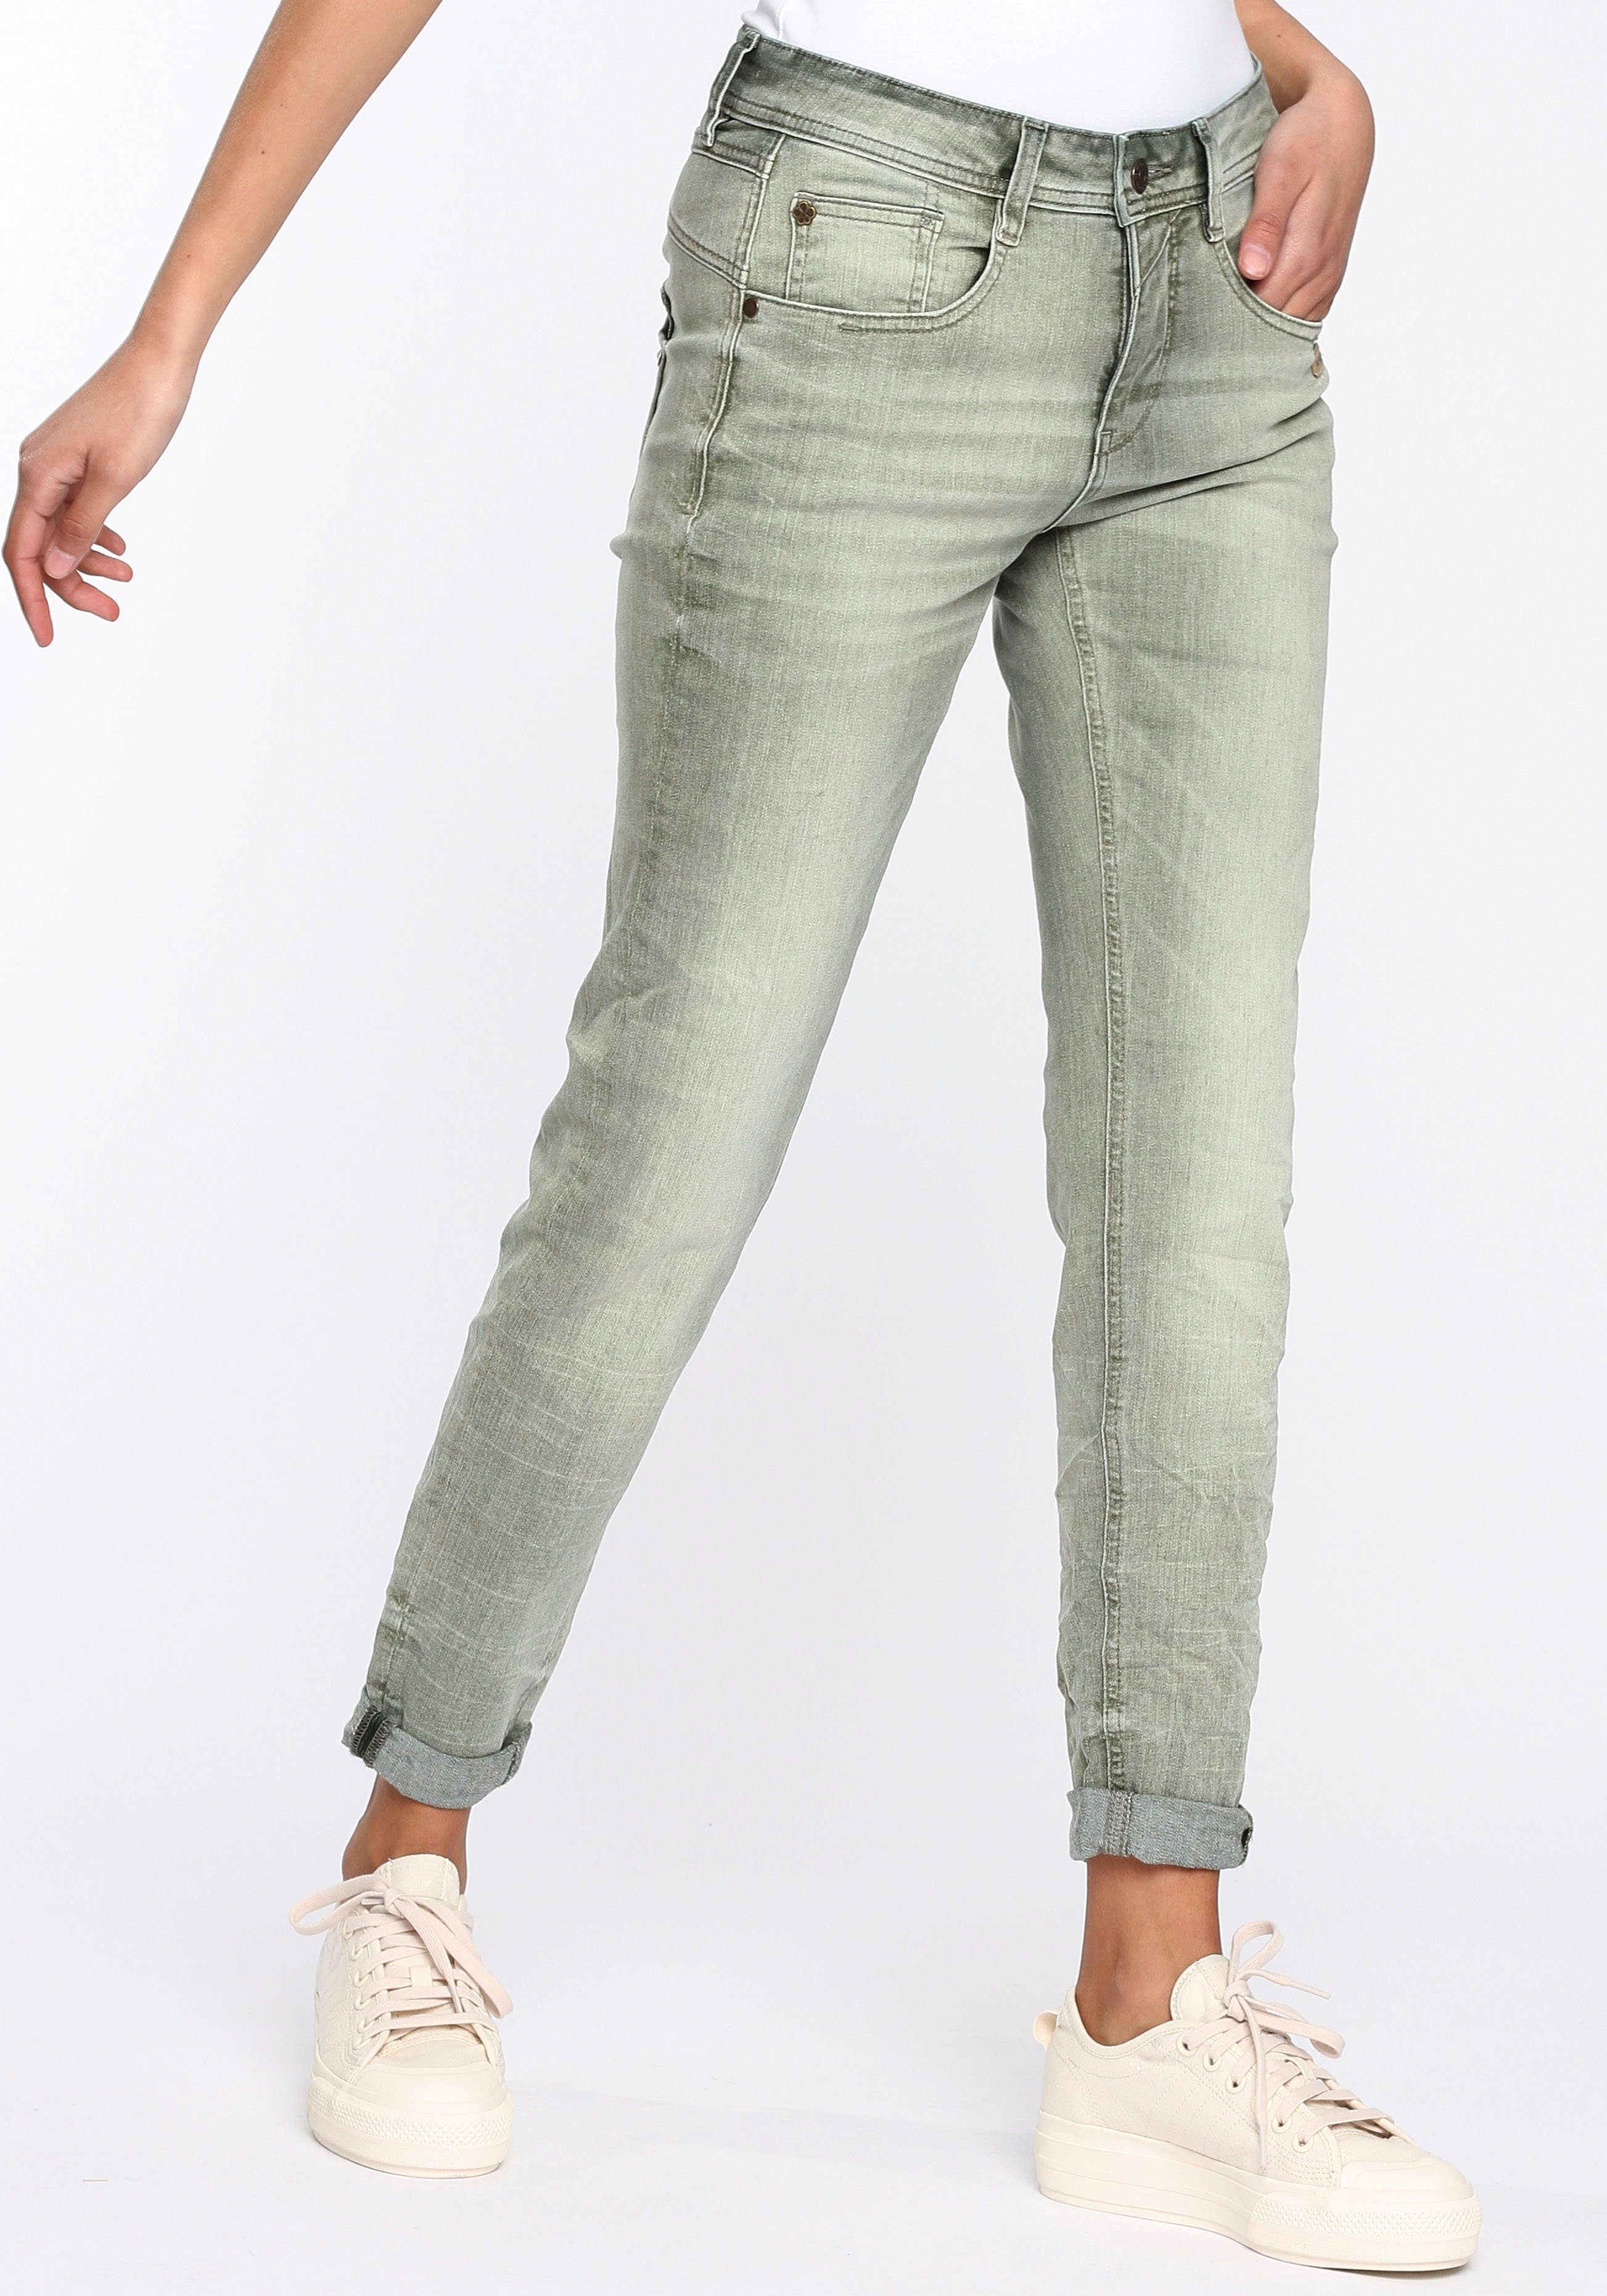 Relax-fit-Jeans durch perfekter (grey used) Elasthan-Anteil GANG Sitz washed 94AMELIE down